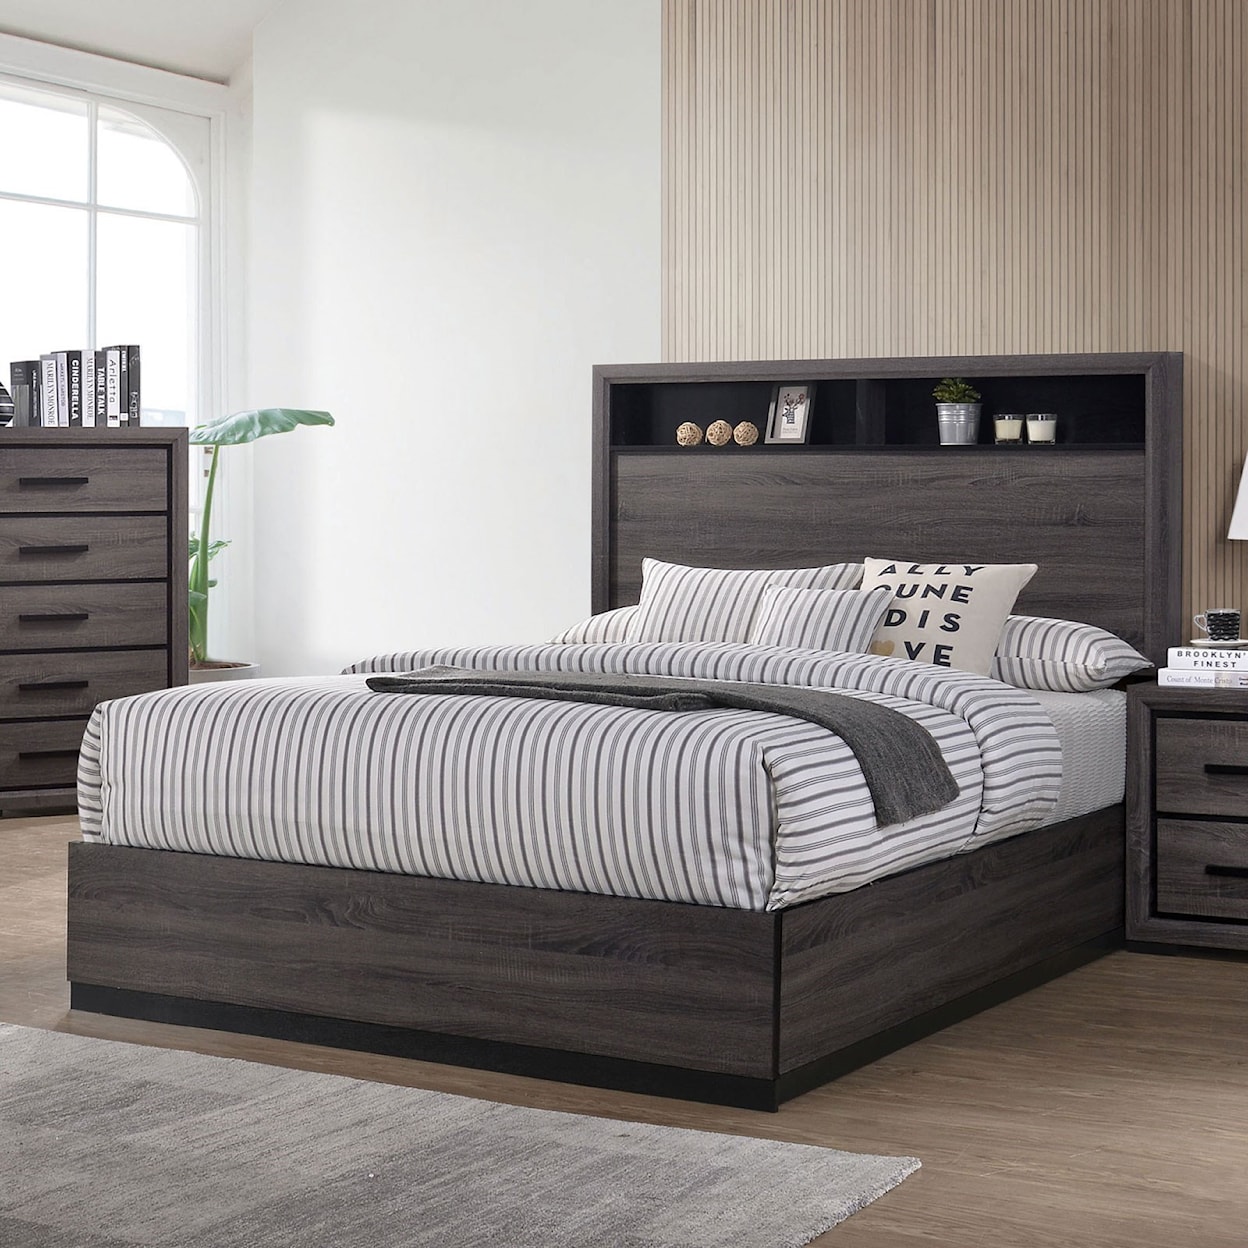 Furniture of America Conwy Queen Bed